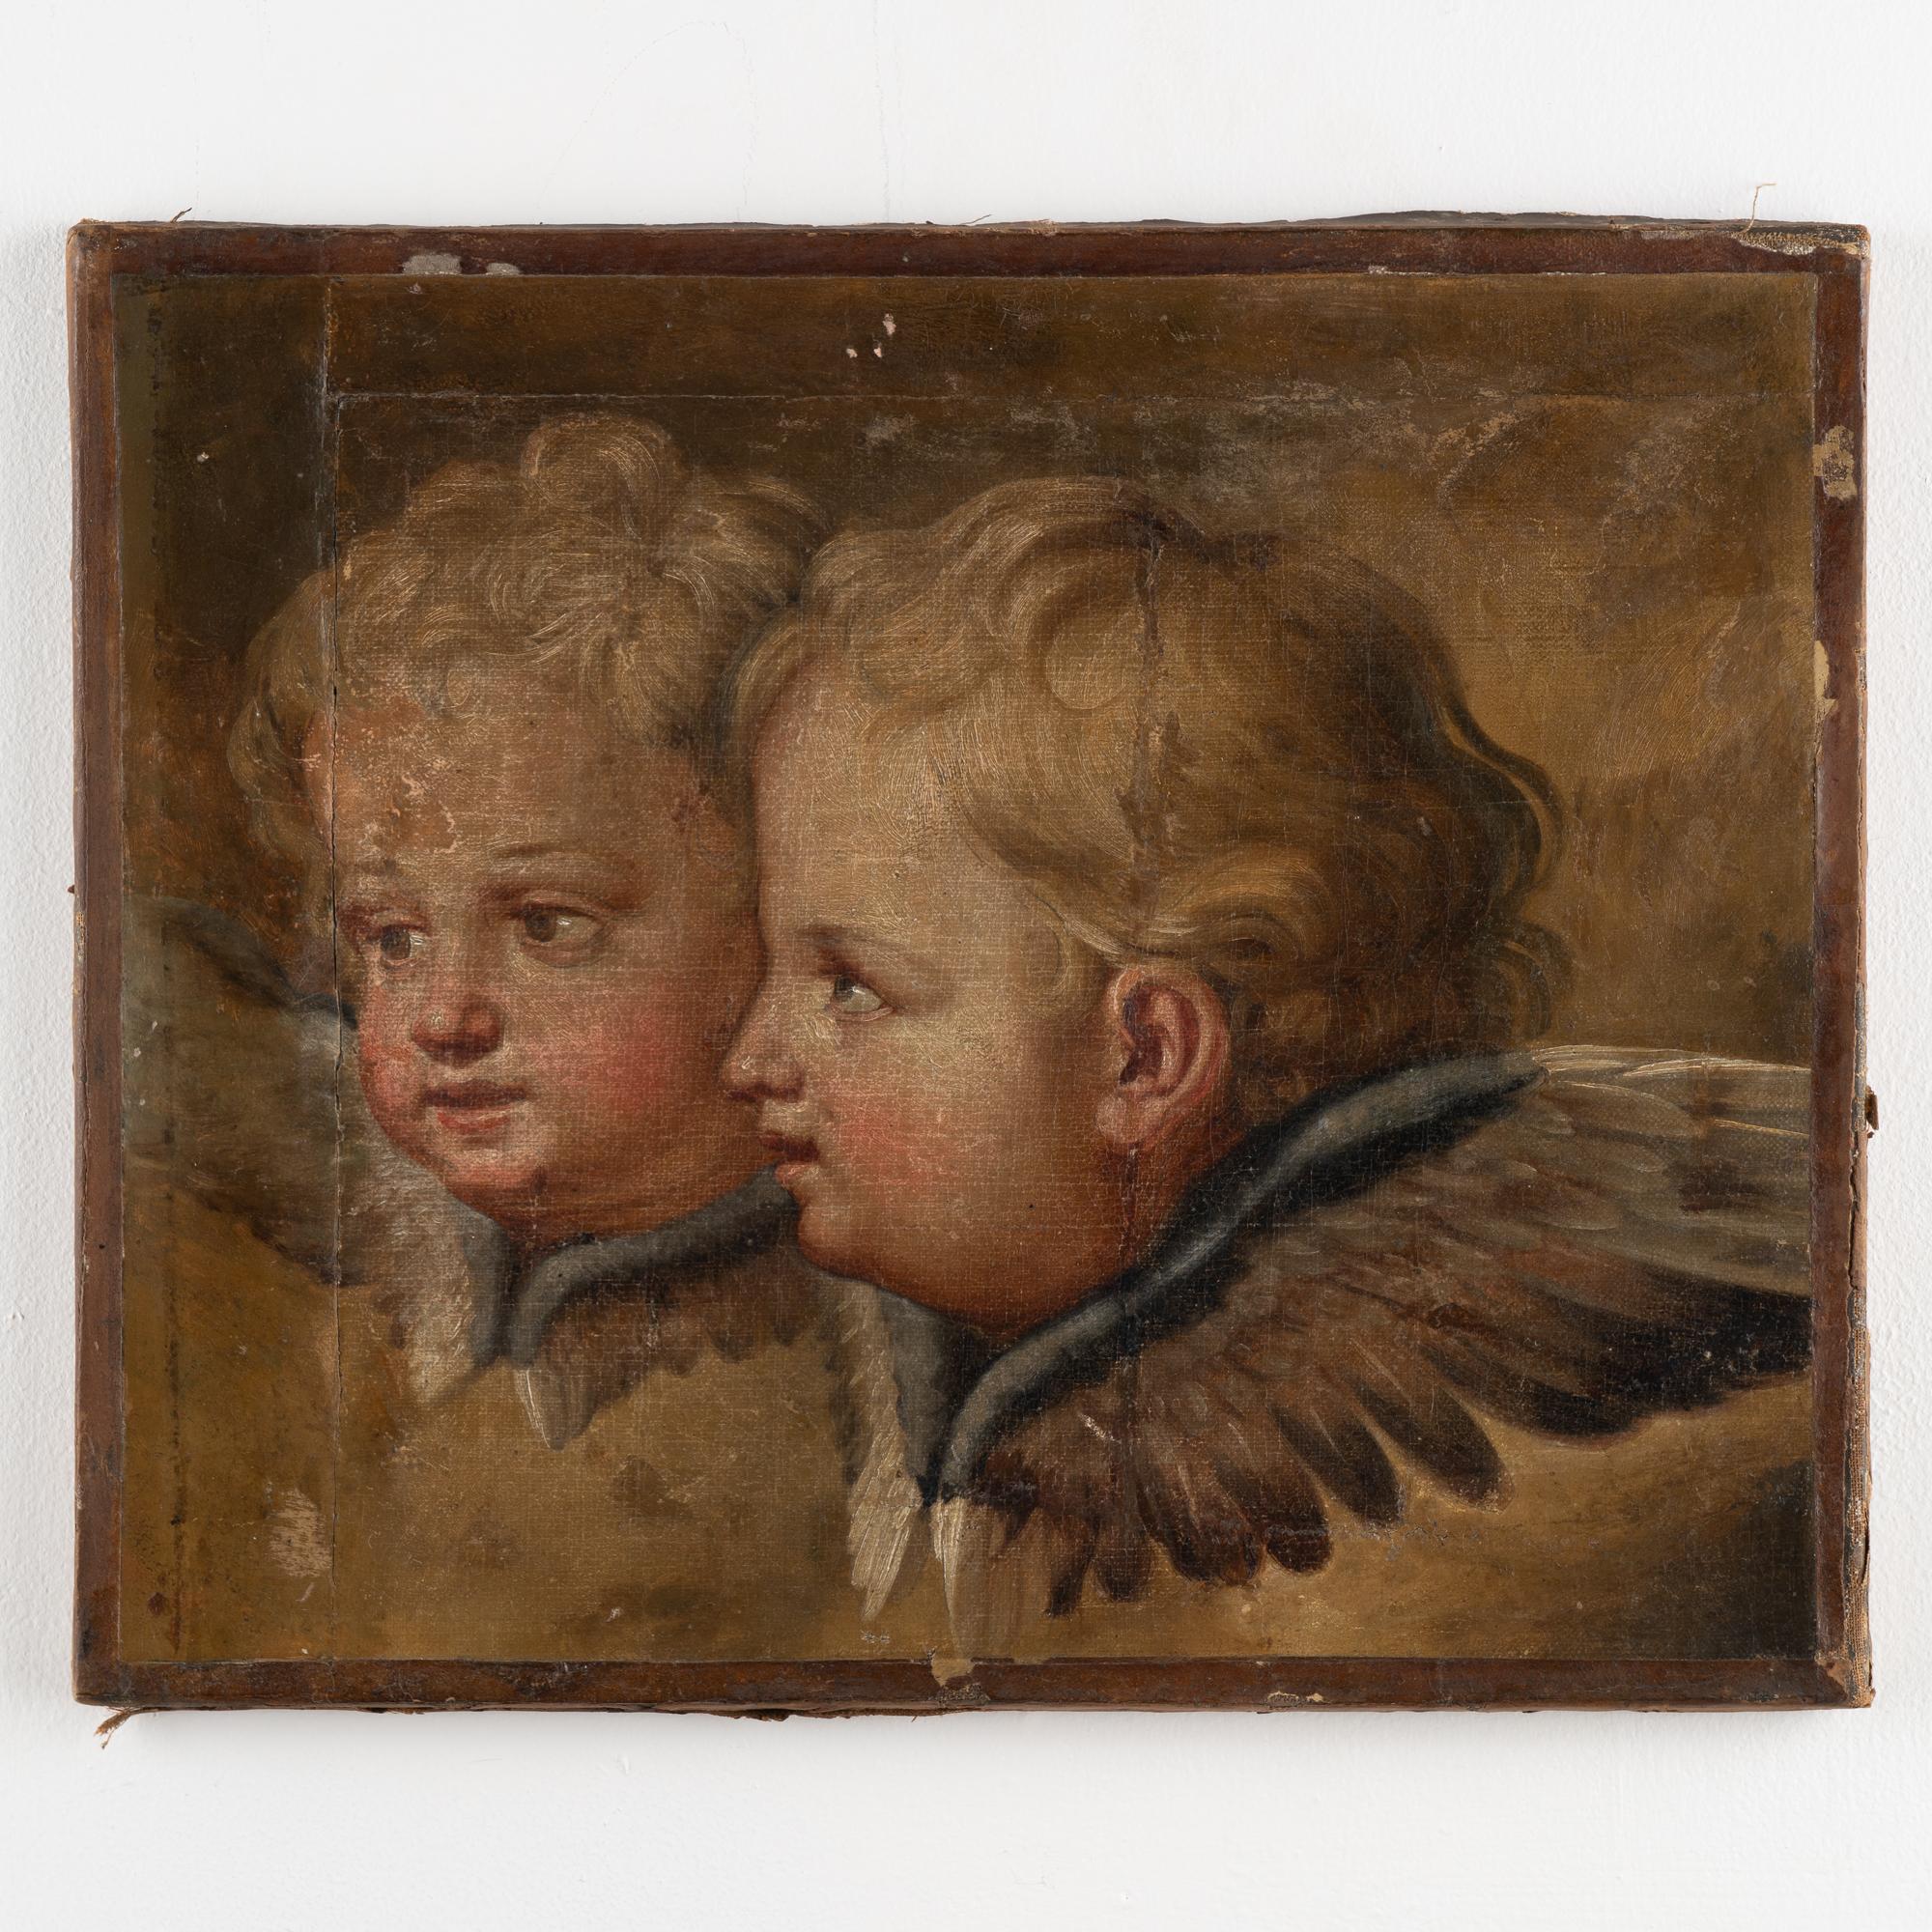 Original oil on canvas portrait painting of two putti with lovely cherub faces crowned by wings. 
Canvas shows extensive craquelure, long vertical and horizontal cracks, old repairs, small holes/pricks etc. Will likely benefit from a light surface